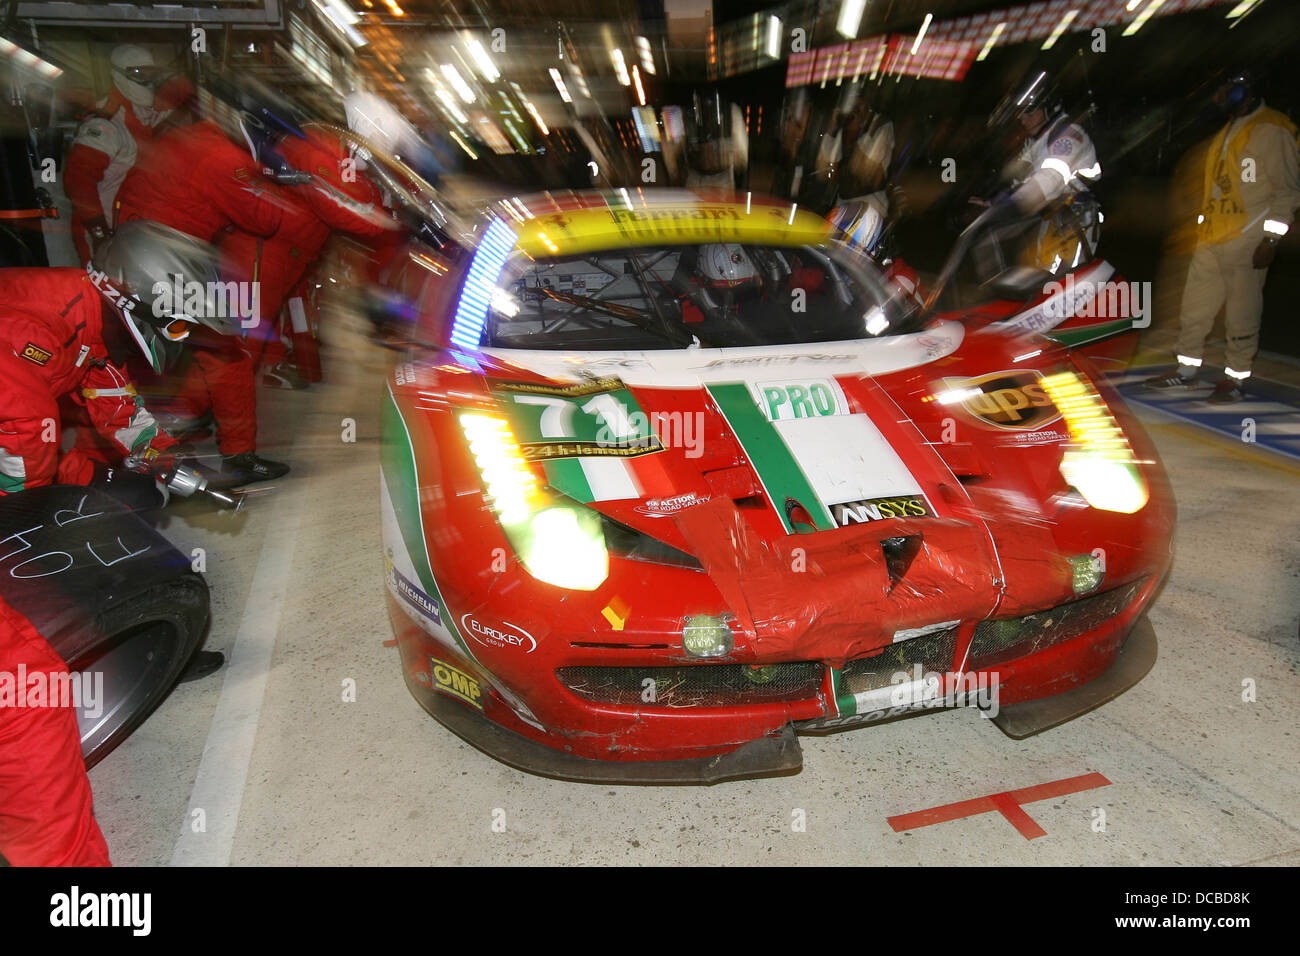 Ferrari pit stop at the 2013 Le Mans 24 Hours. Stock Photo